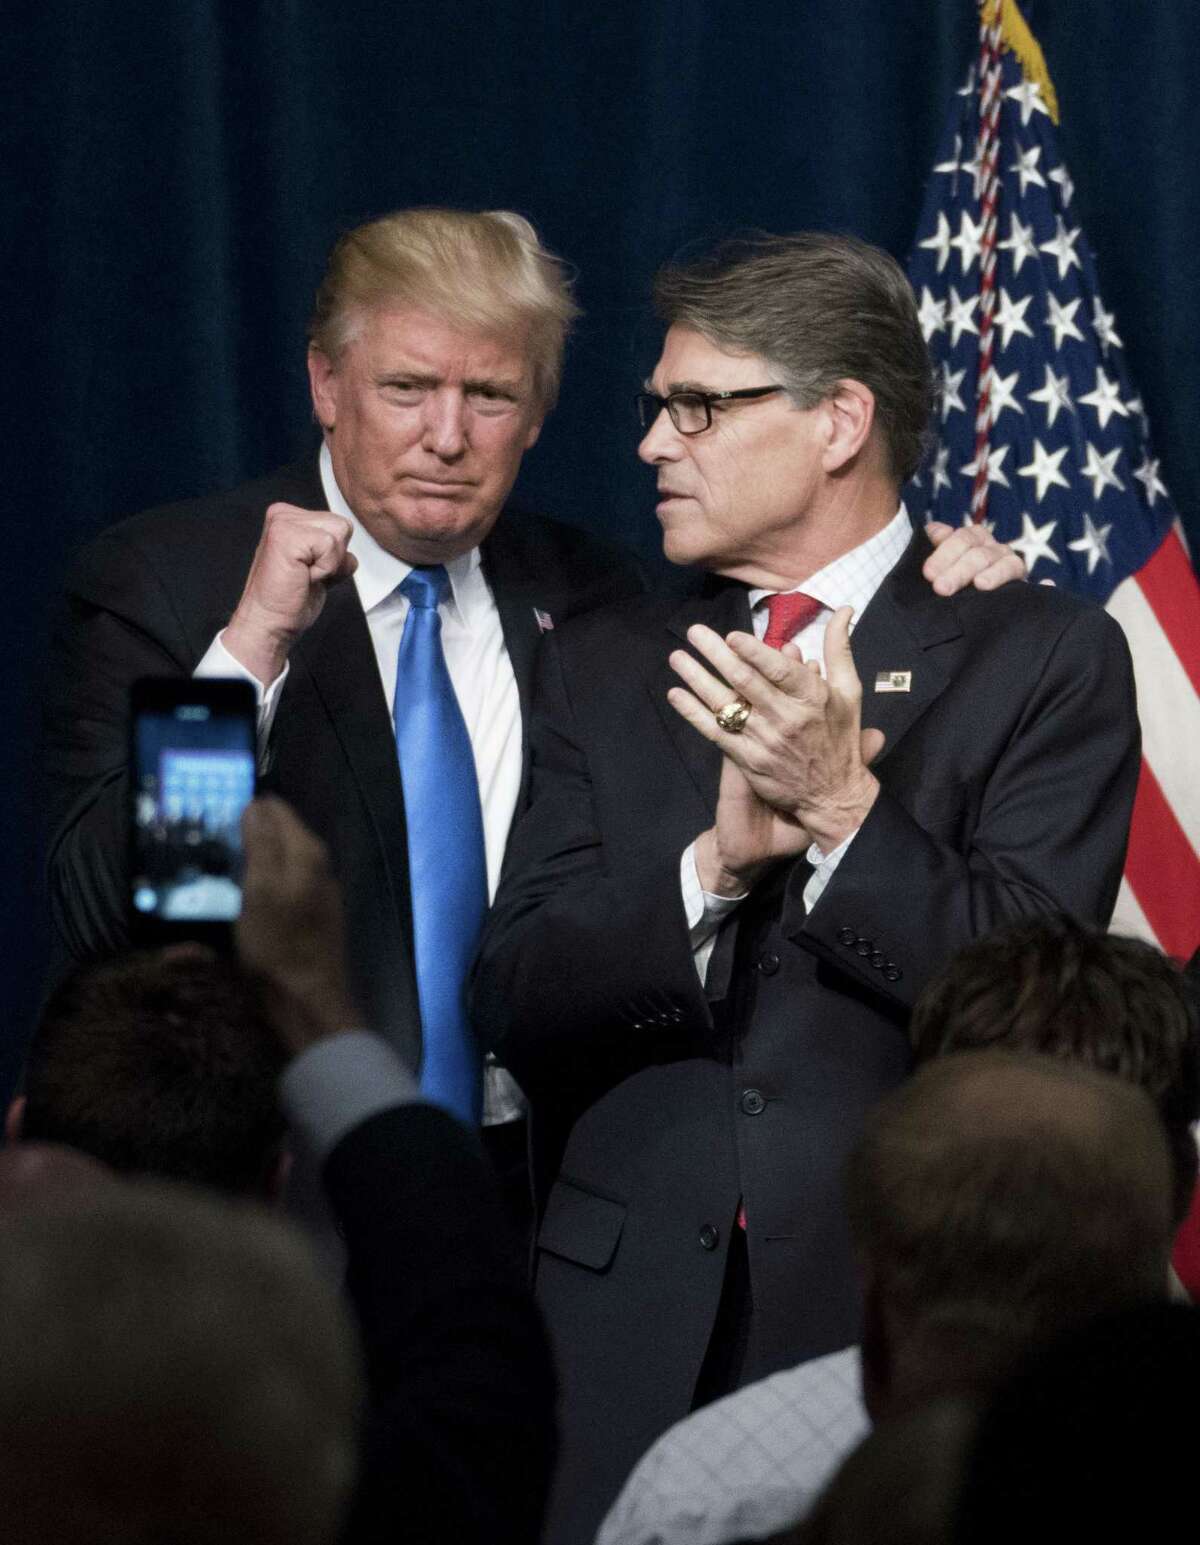 Natural gas producers believe that Energy Secretary Rick Perry has raised the issue of cyber security of gas pipelines to justify bailing out a coal sector that President Donald Trump has promised to revive.